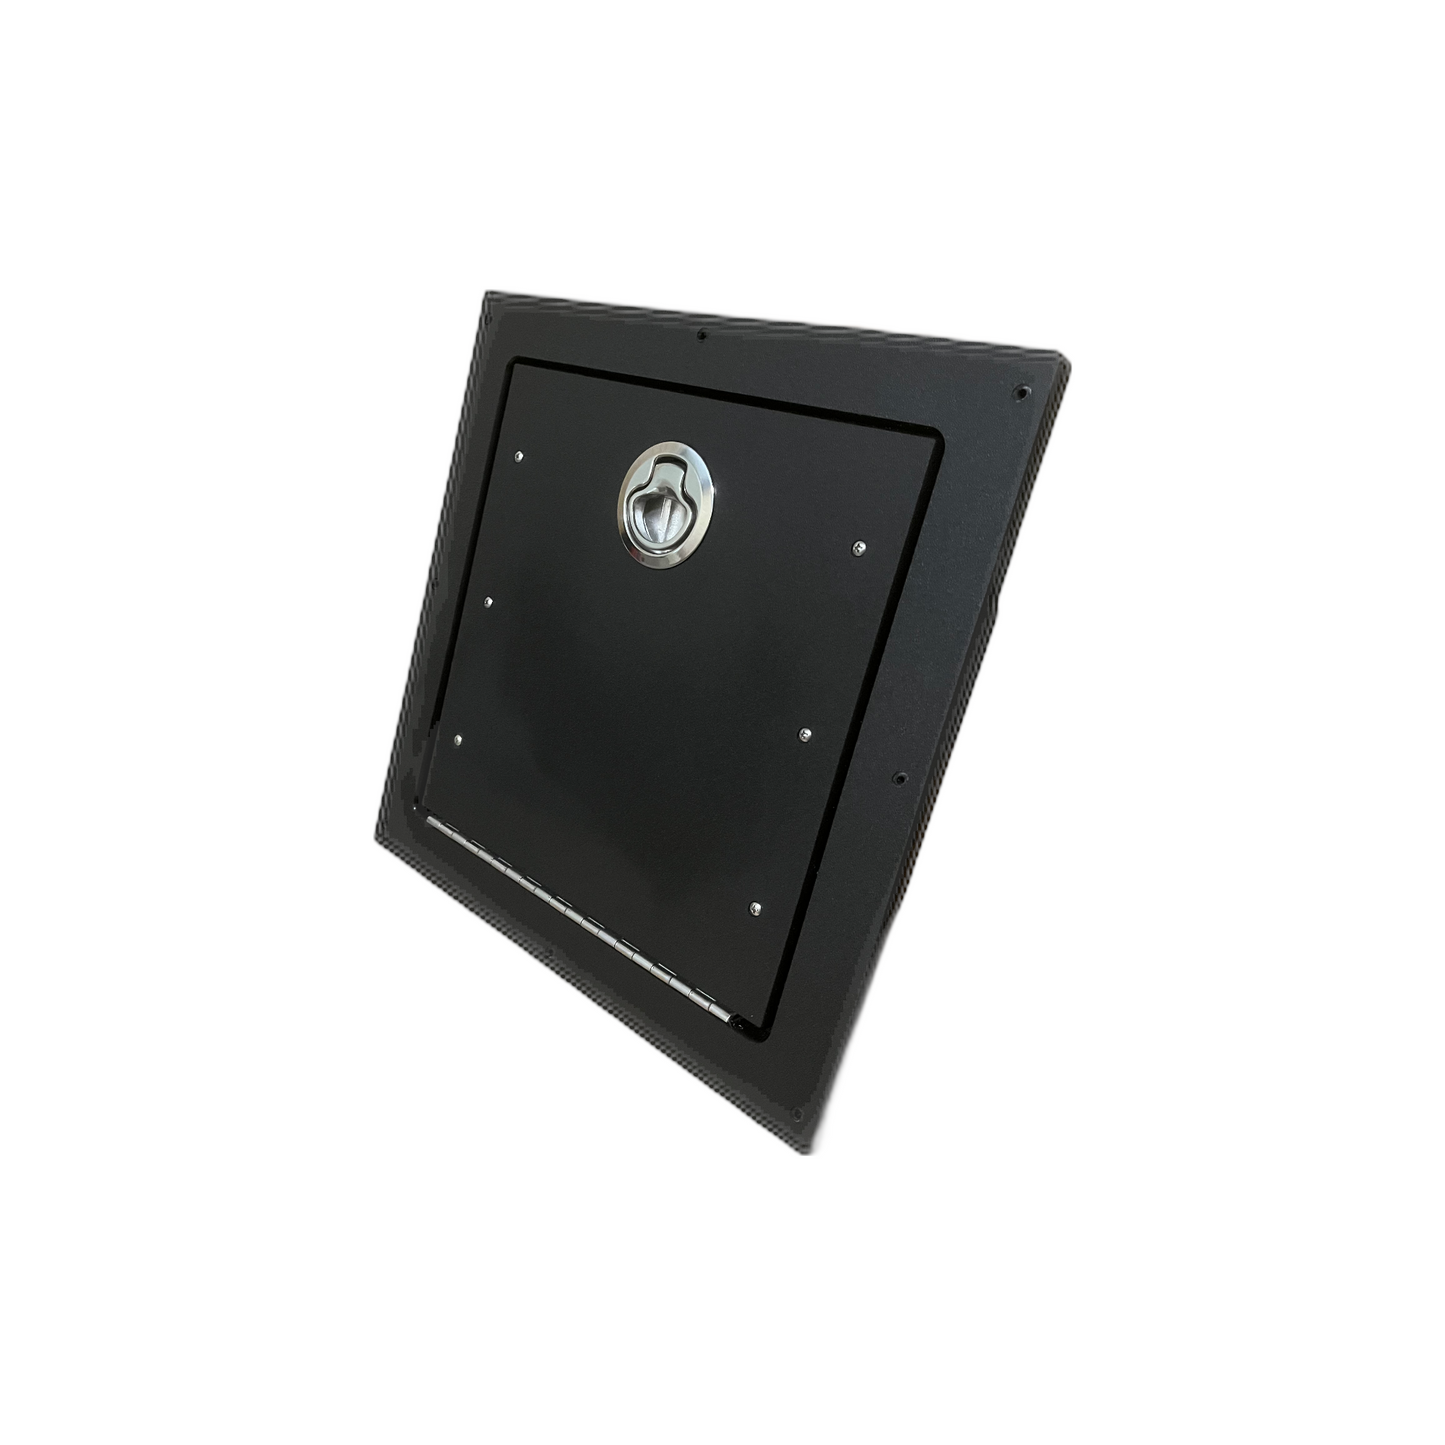 This MarineFab USA product is a 14x14-inch tilt out storage hatch for the boat. This pull-out boat hatch fits in a 12 x 12-inch hole cutout and comes with 316 stainless steel hardware.